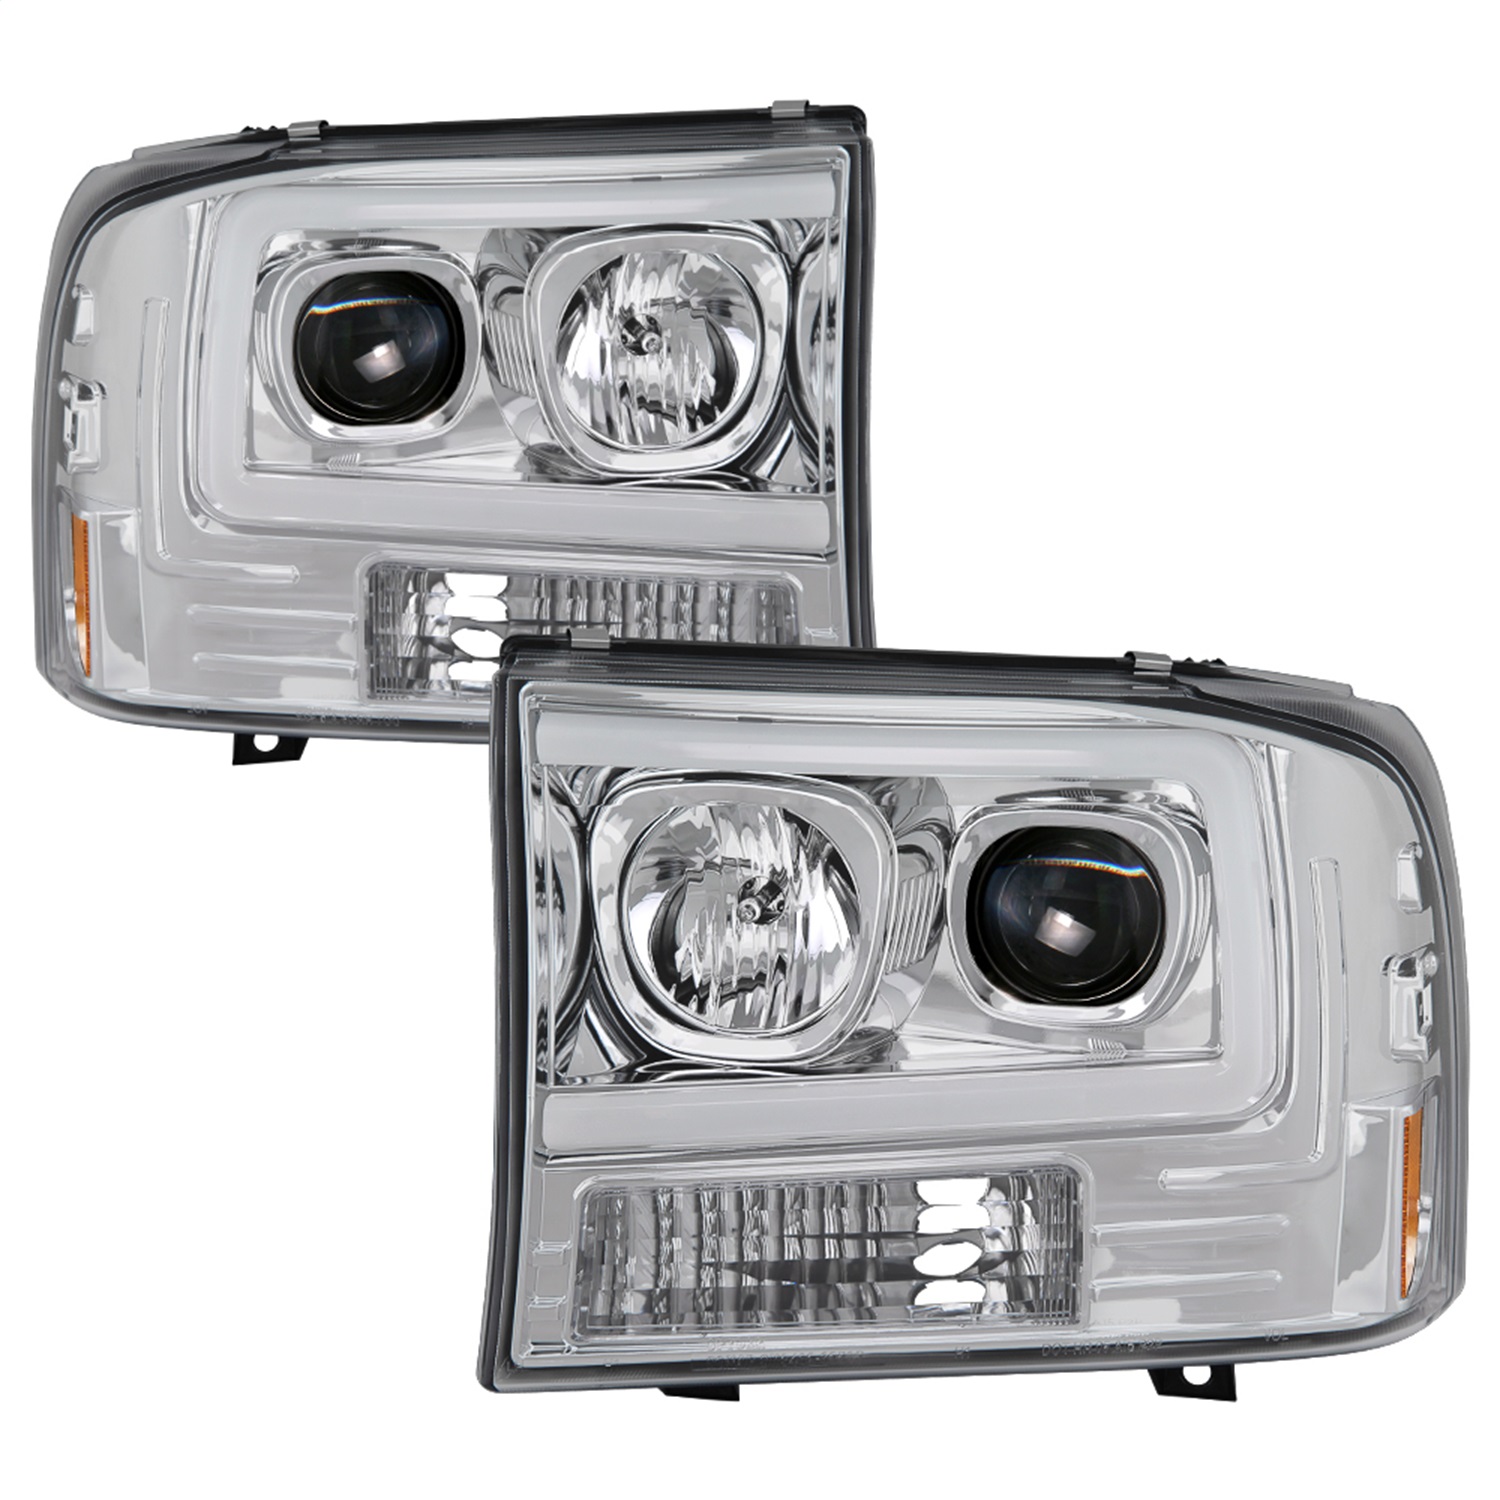 Spyder Auto 5084675 Projector Headlights Fits 99-04 Excursion F-250 Super Duty